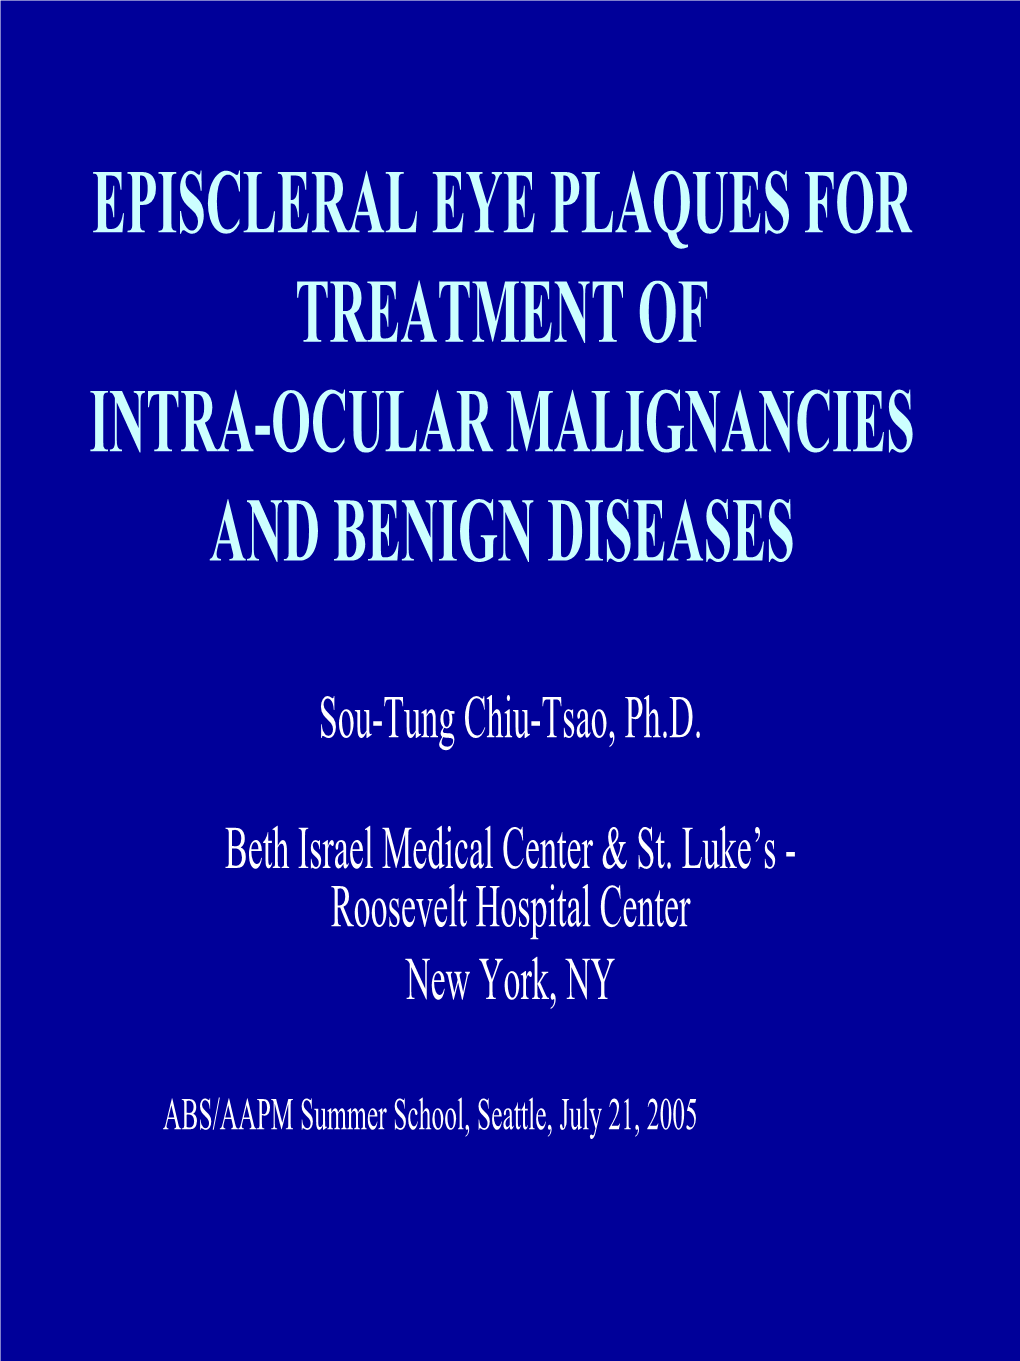 Episcleral Eye Plaques for Treatment of Intra-Ocular Malignancies and Benign Diseases